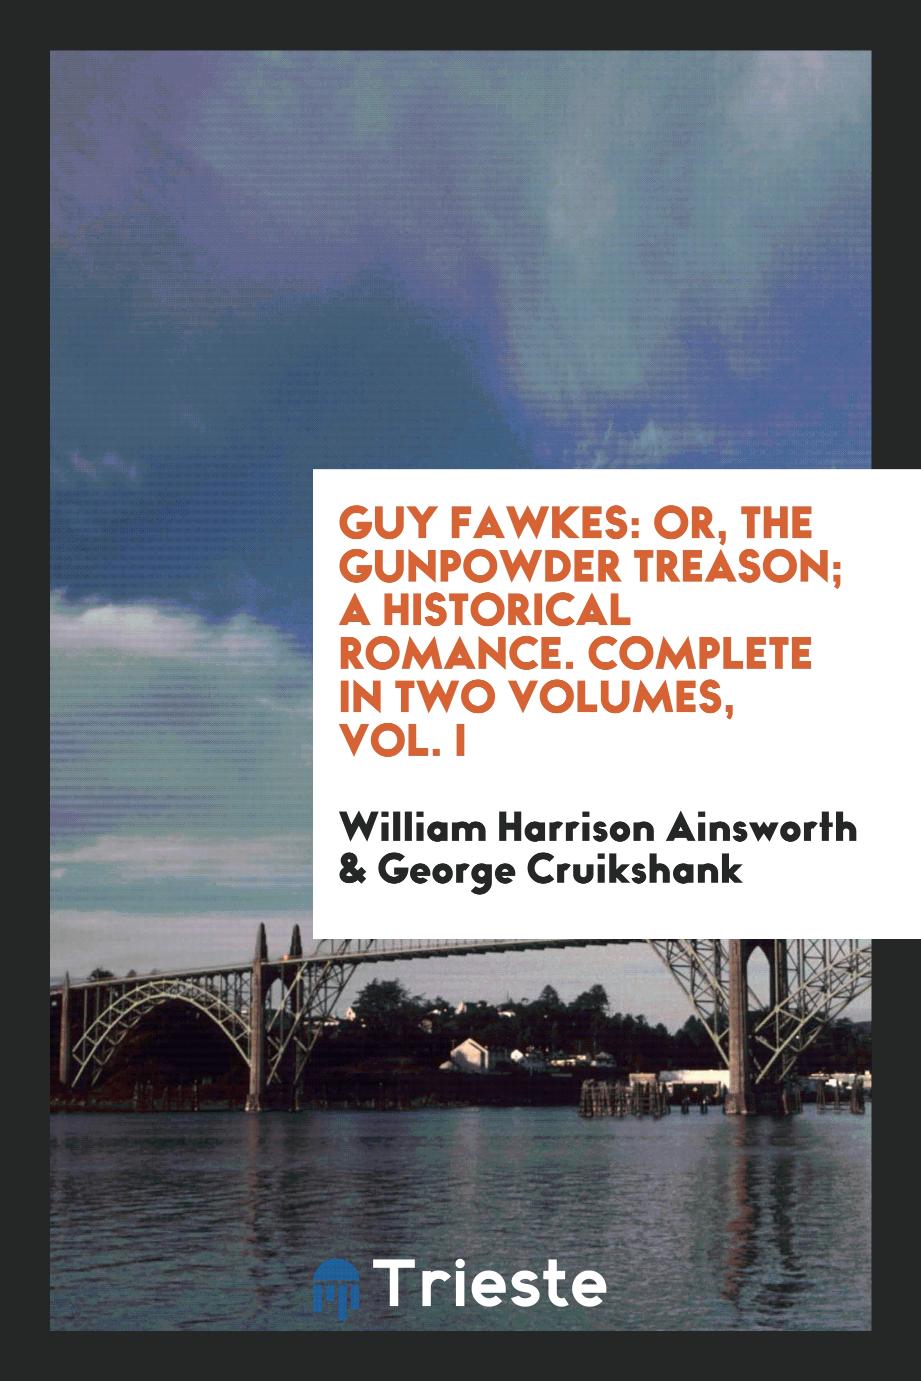 Guy Fawkes: Or, The Gunpowder Treason; A Historical Romance. Complete in Two Volumes, Vol. I